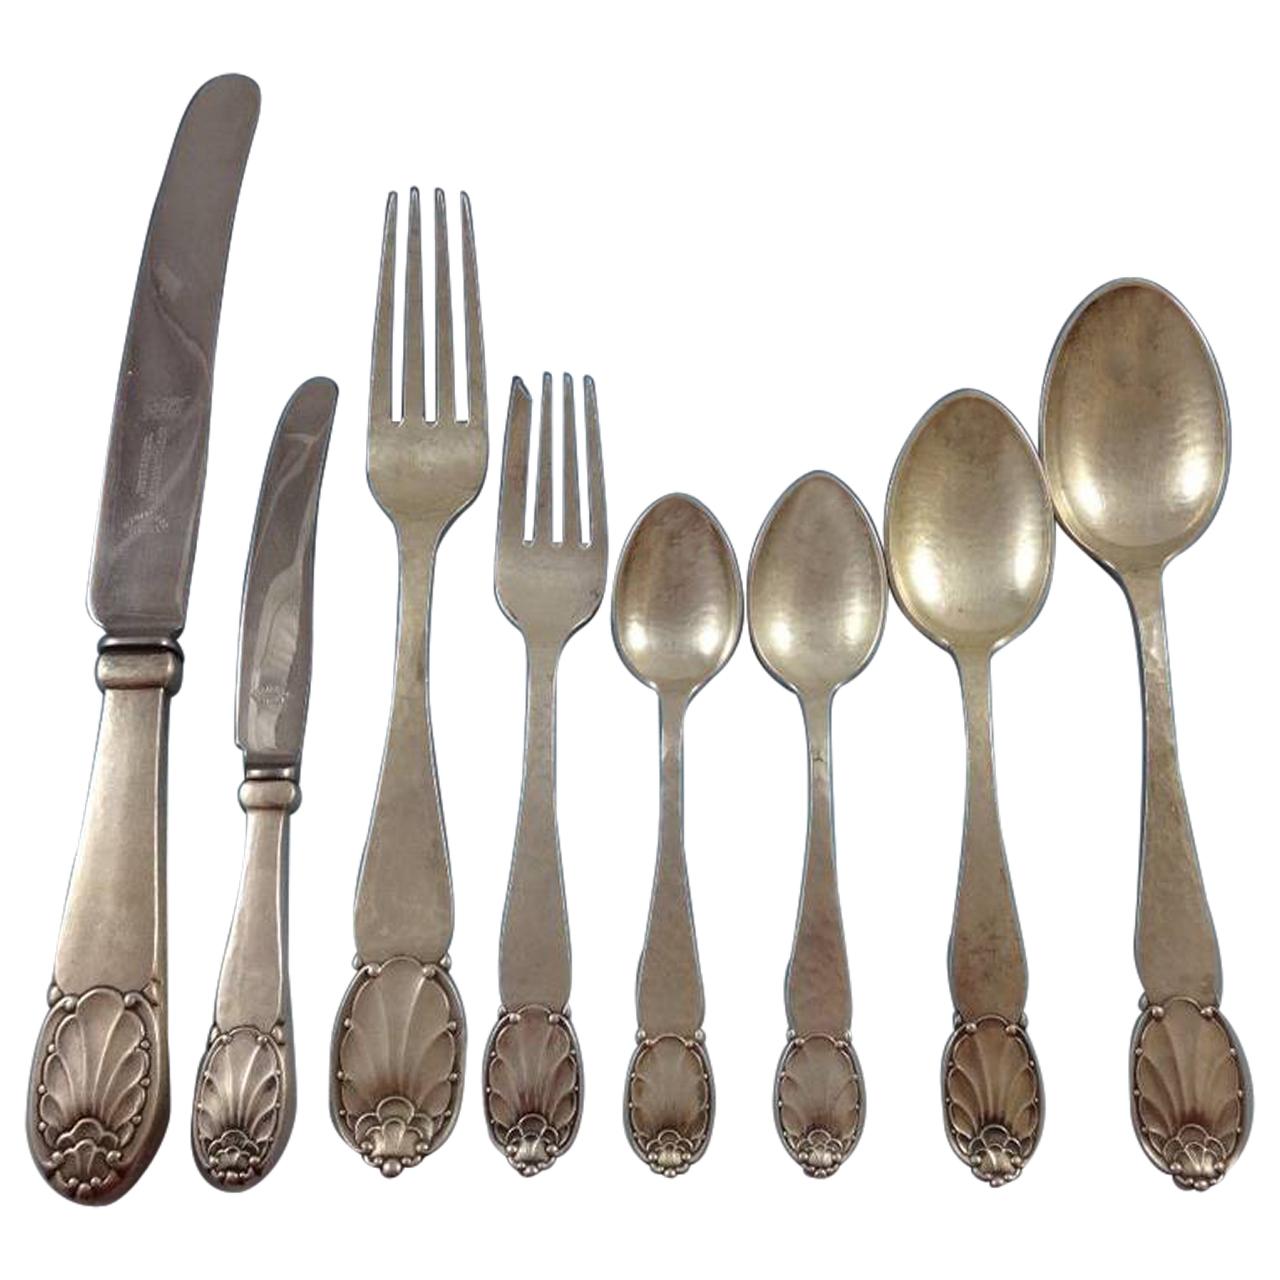 "Danish" by Christian Heise Silver Dinner Flatware Set of 106 Handmade Pieces For Sale